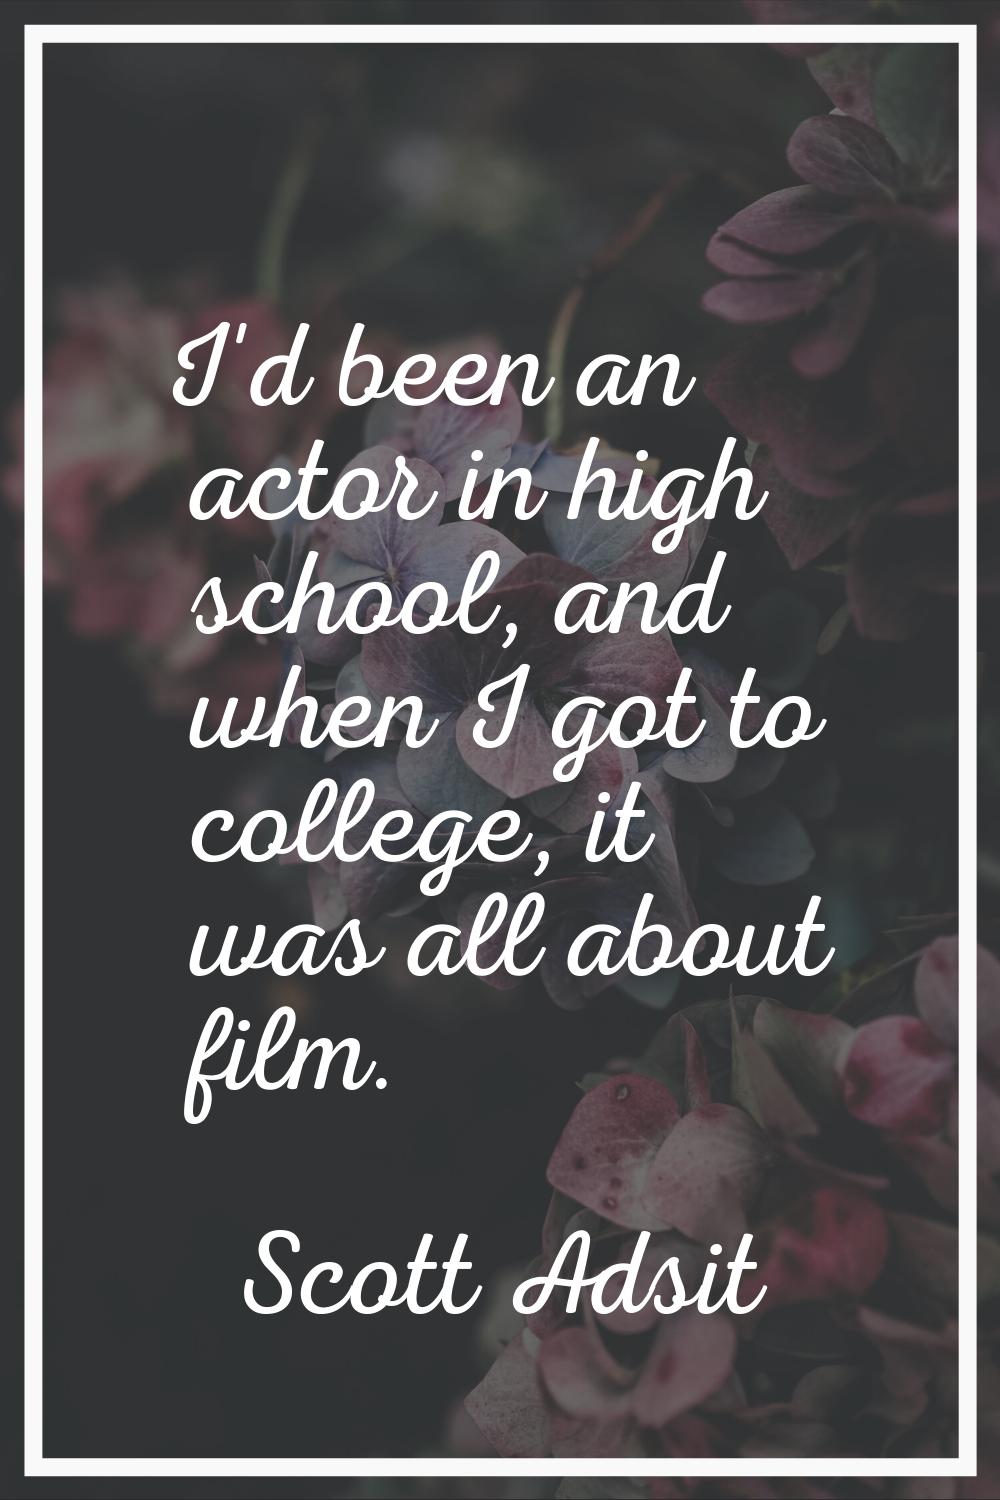 I'd been an actor in high school, and when I got to college, it was all about film.